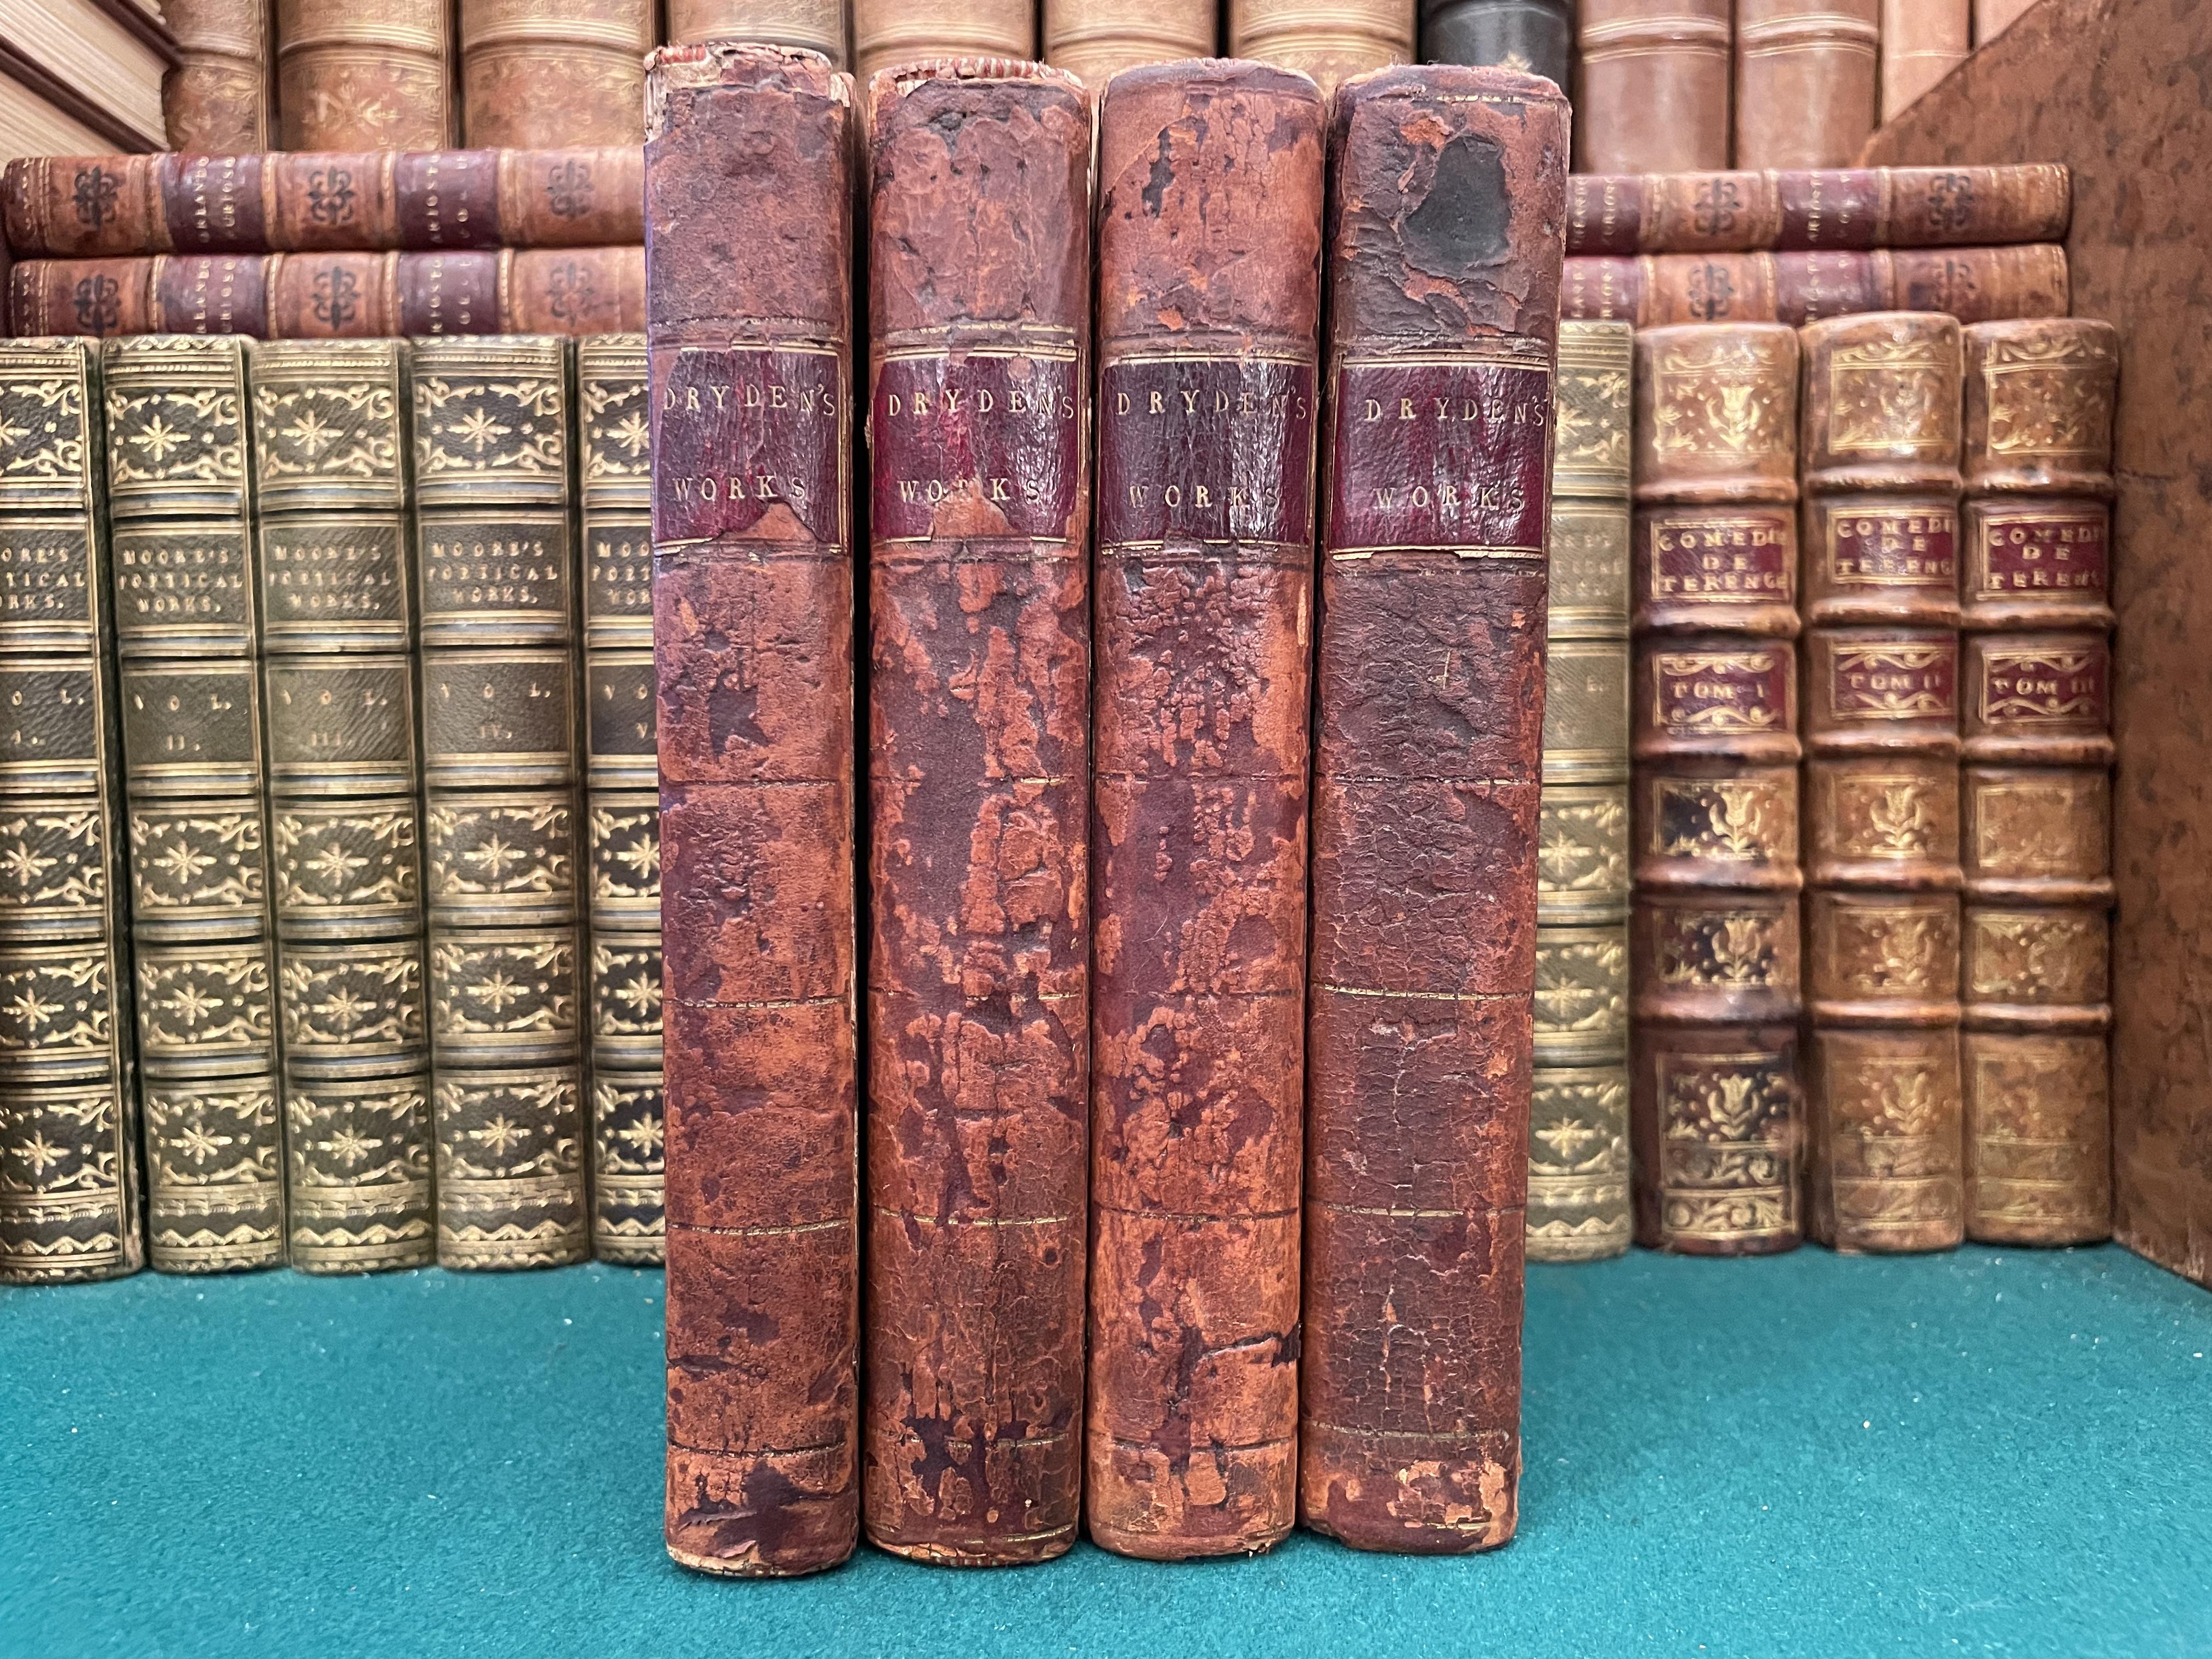 The Miscellaneous Works of John Dryden: Containing All His Original Poems, Tales, and Translations. 4 vols (set) - DRYDEN, John